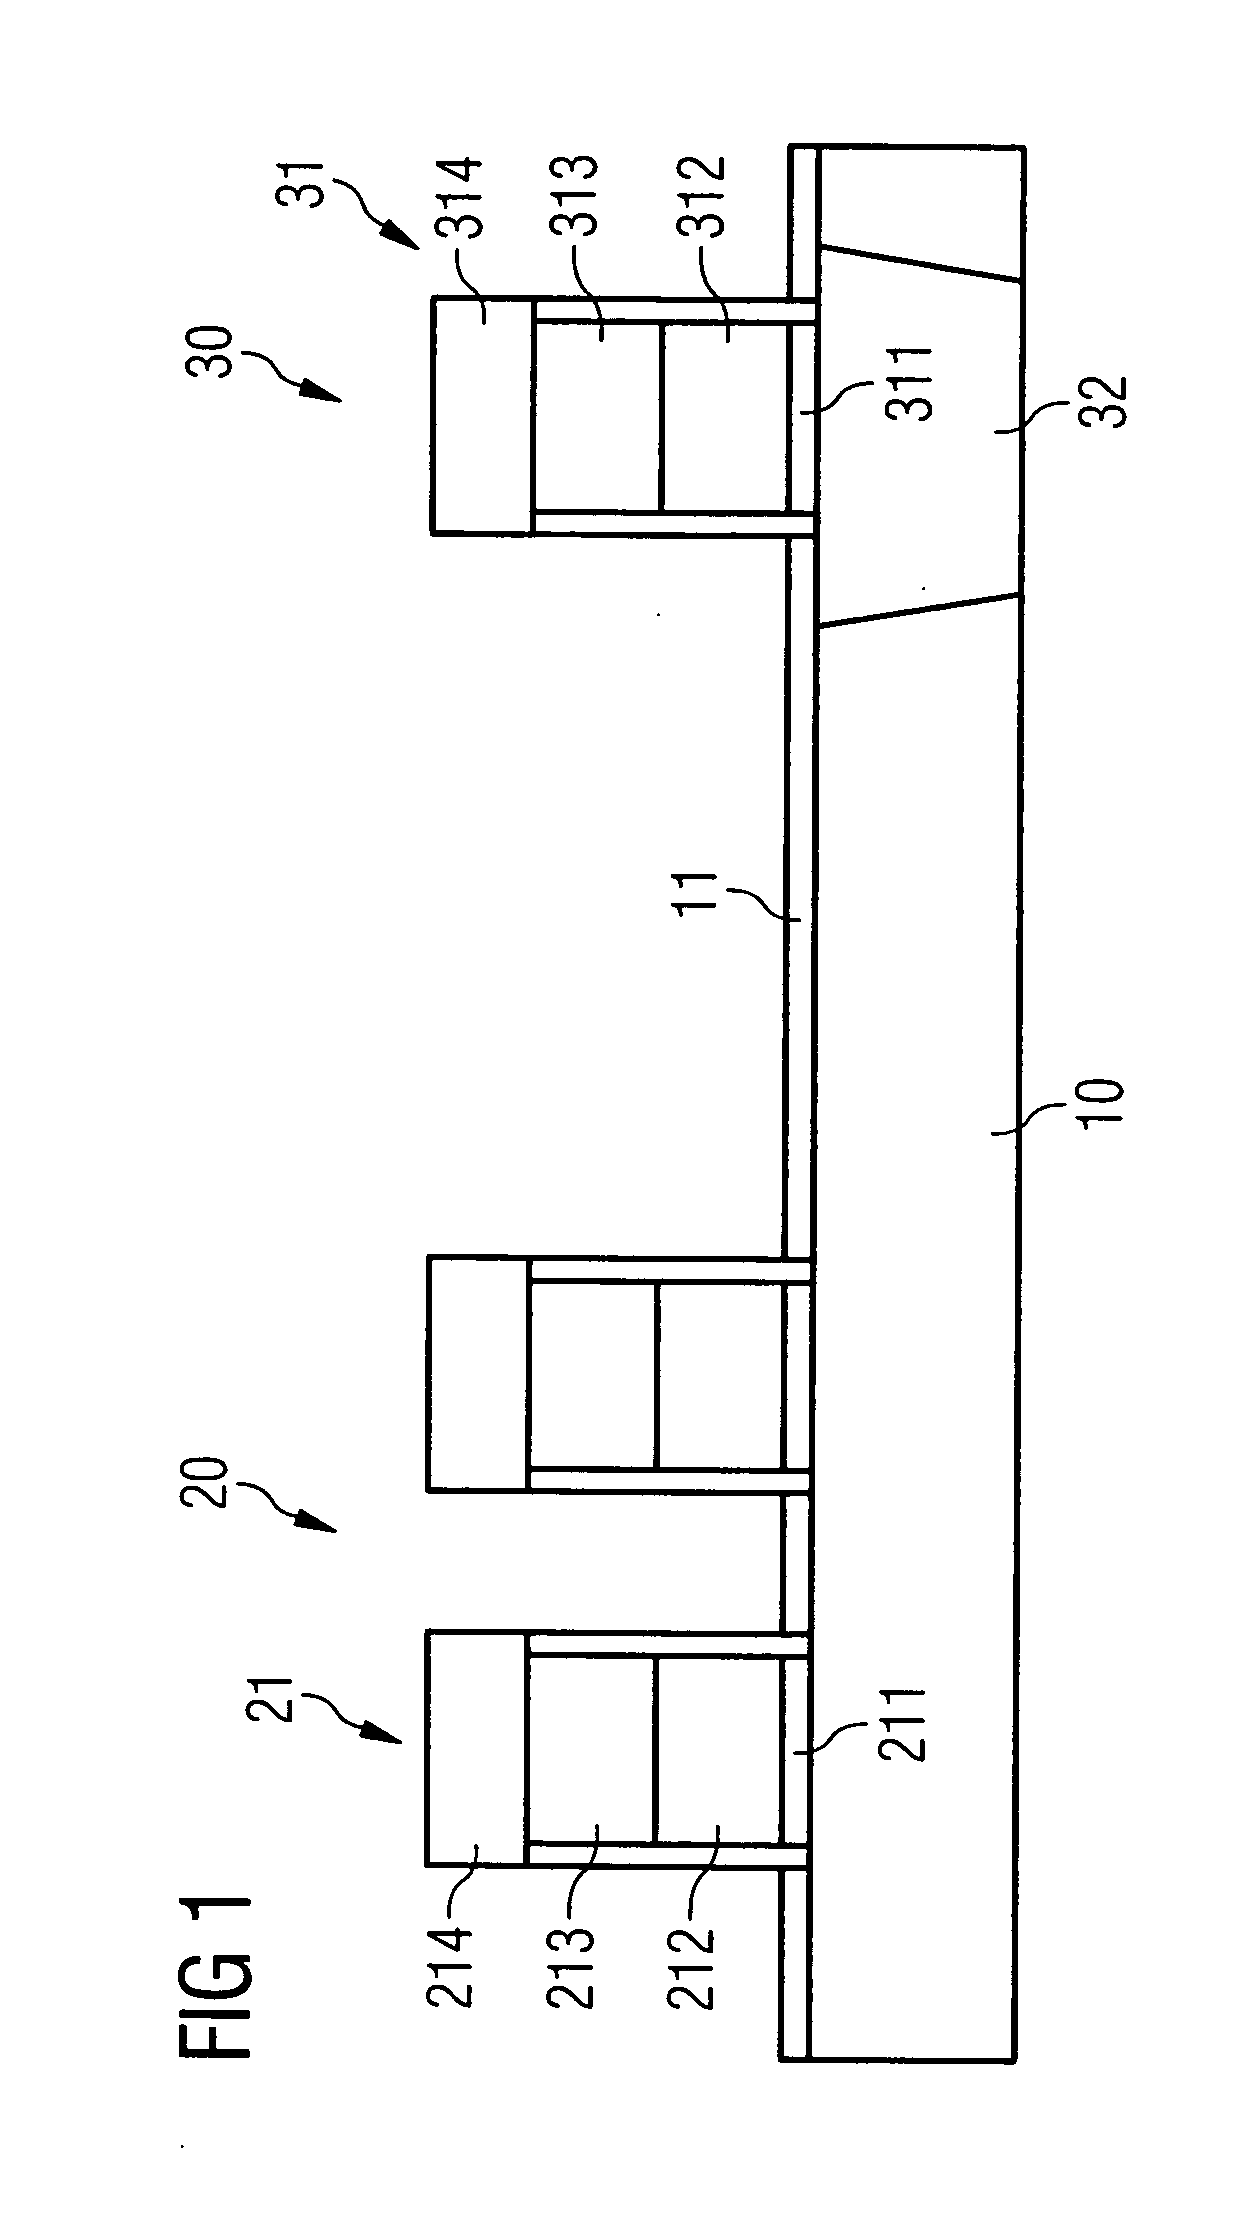 Method for fabricating a first contact hole plane in a memory module